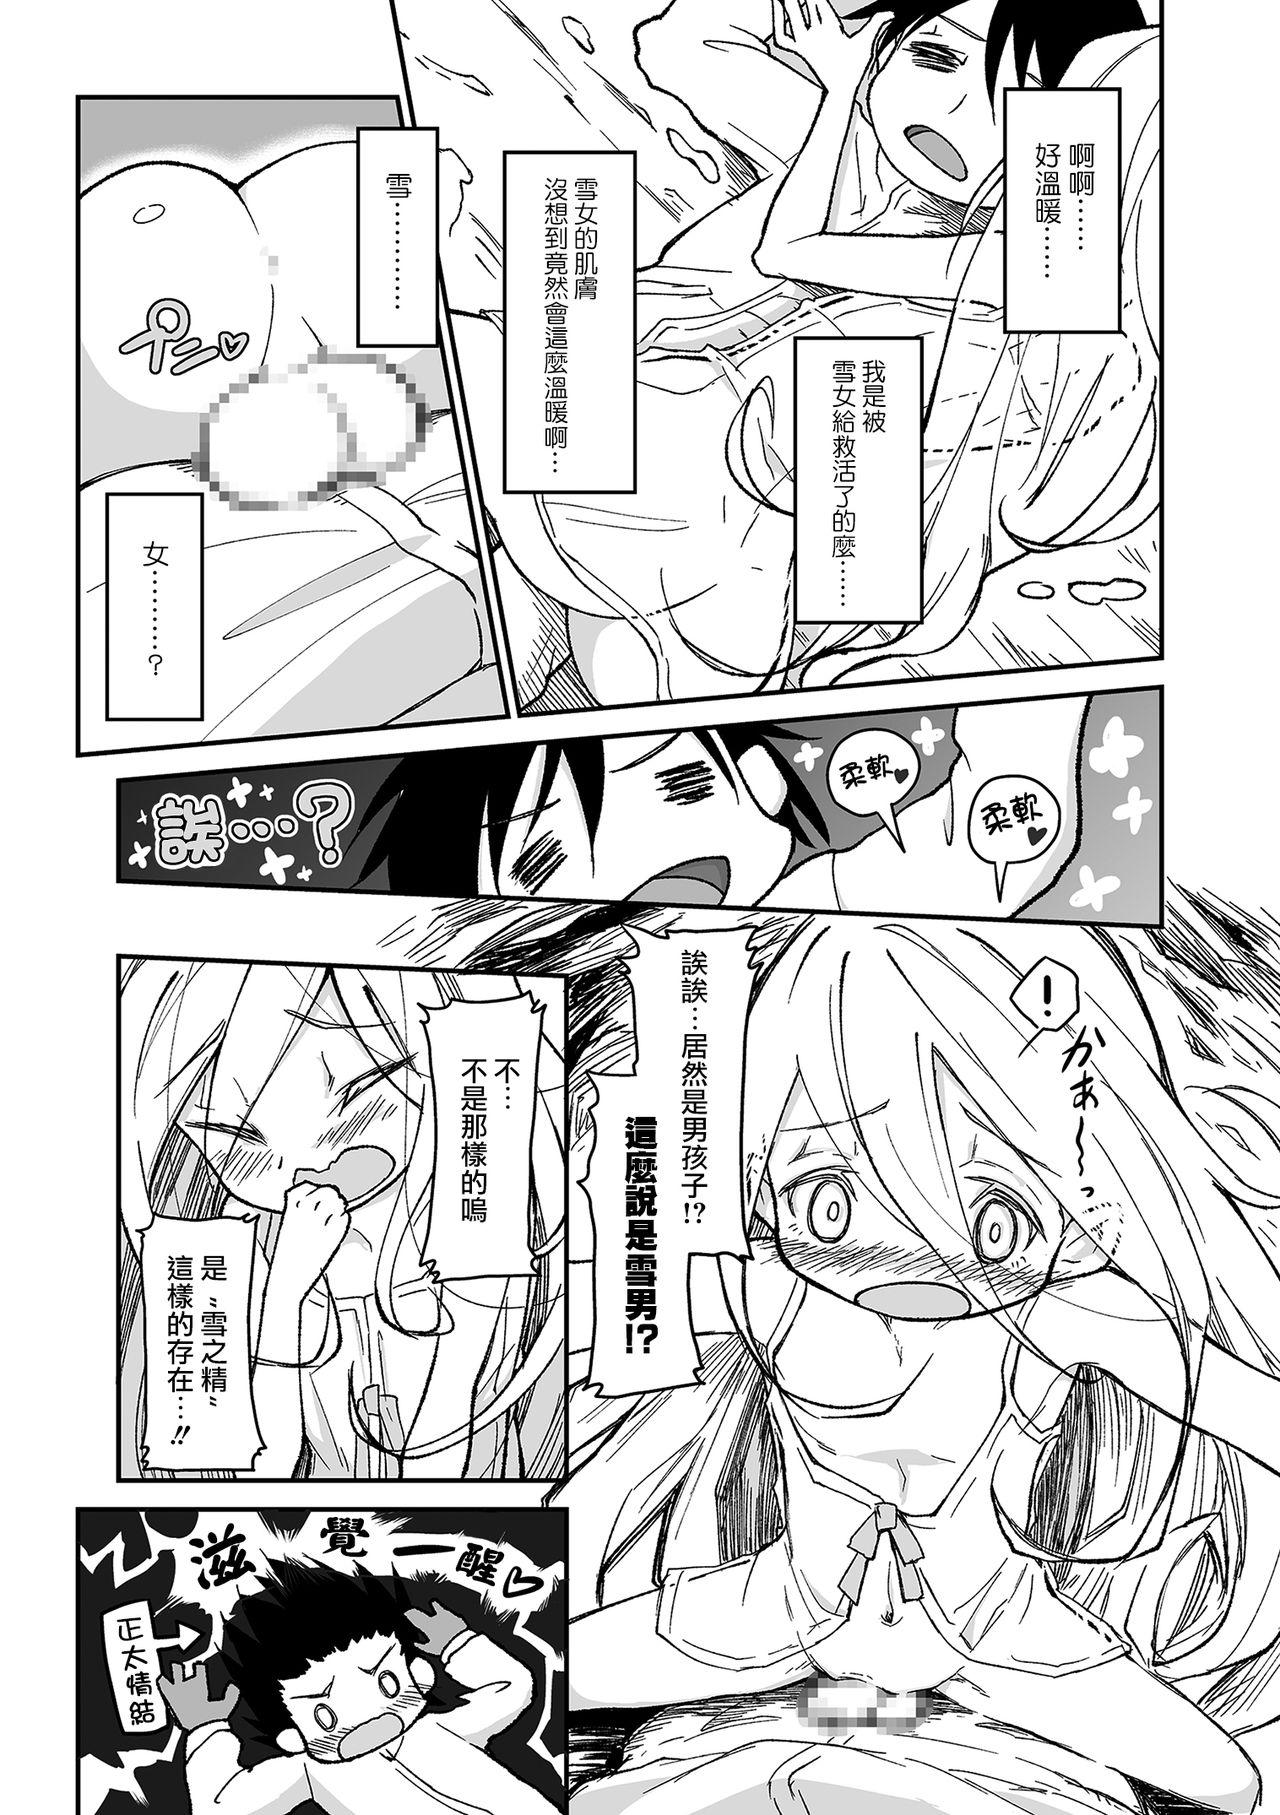 Tiny ユキのせい？ Hot Girls Getting Fucked - Page 5